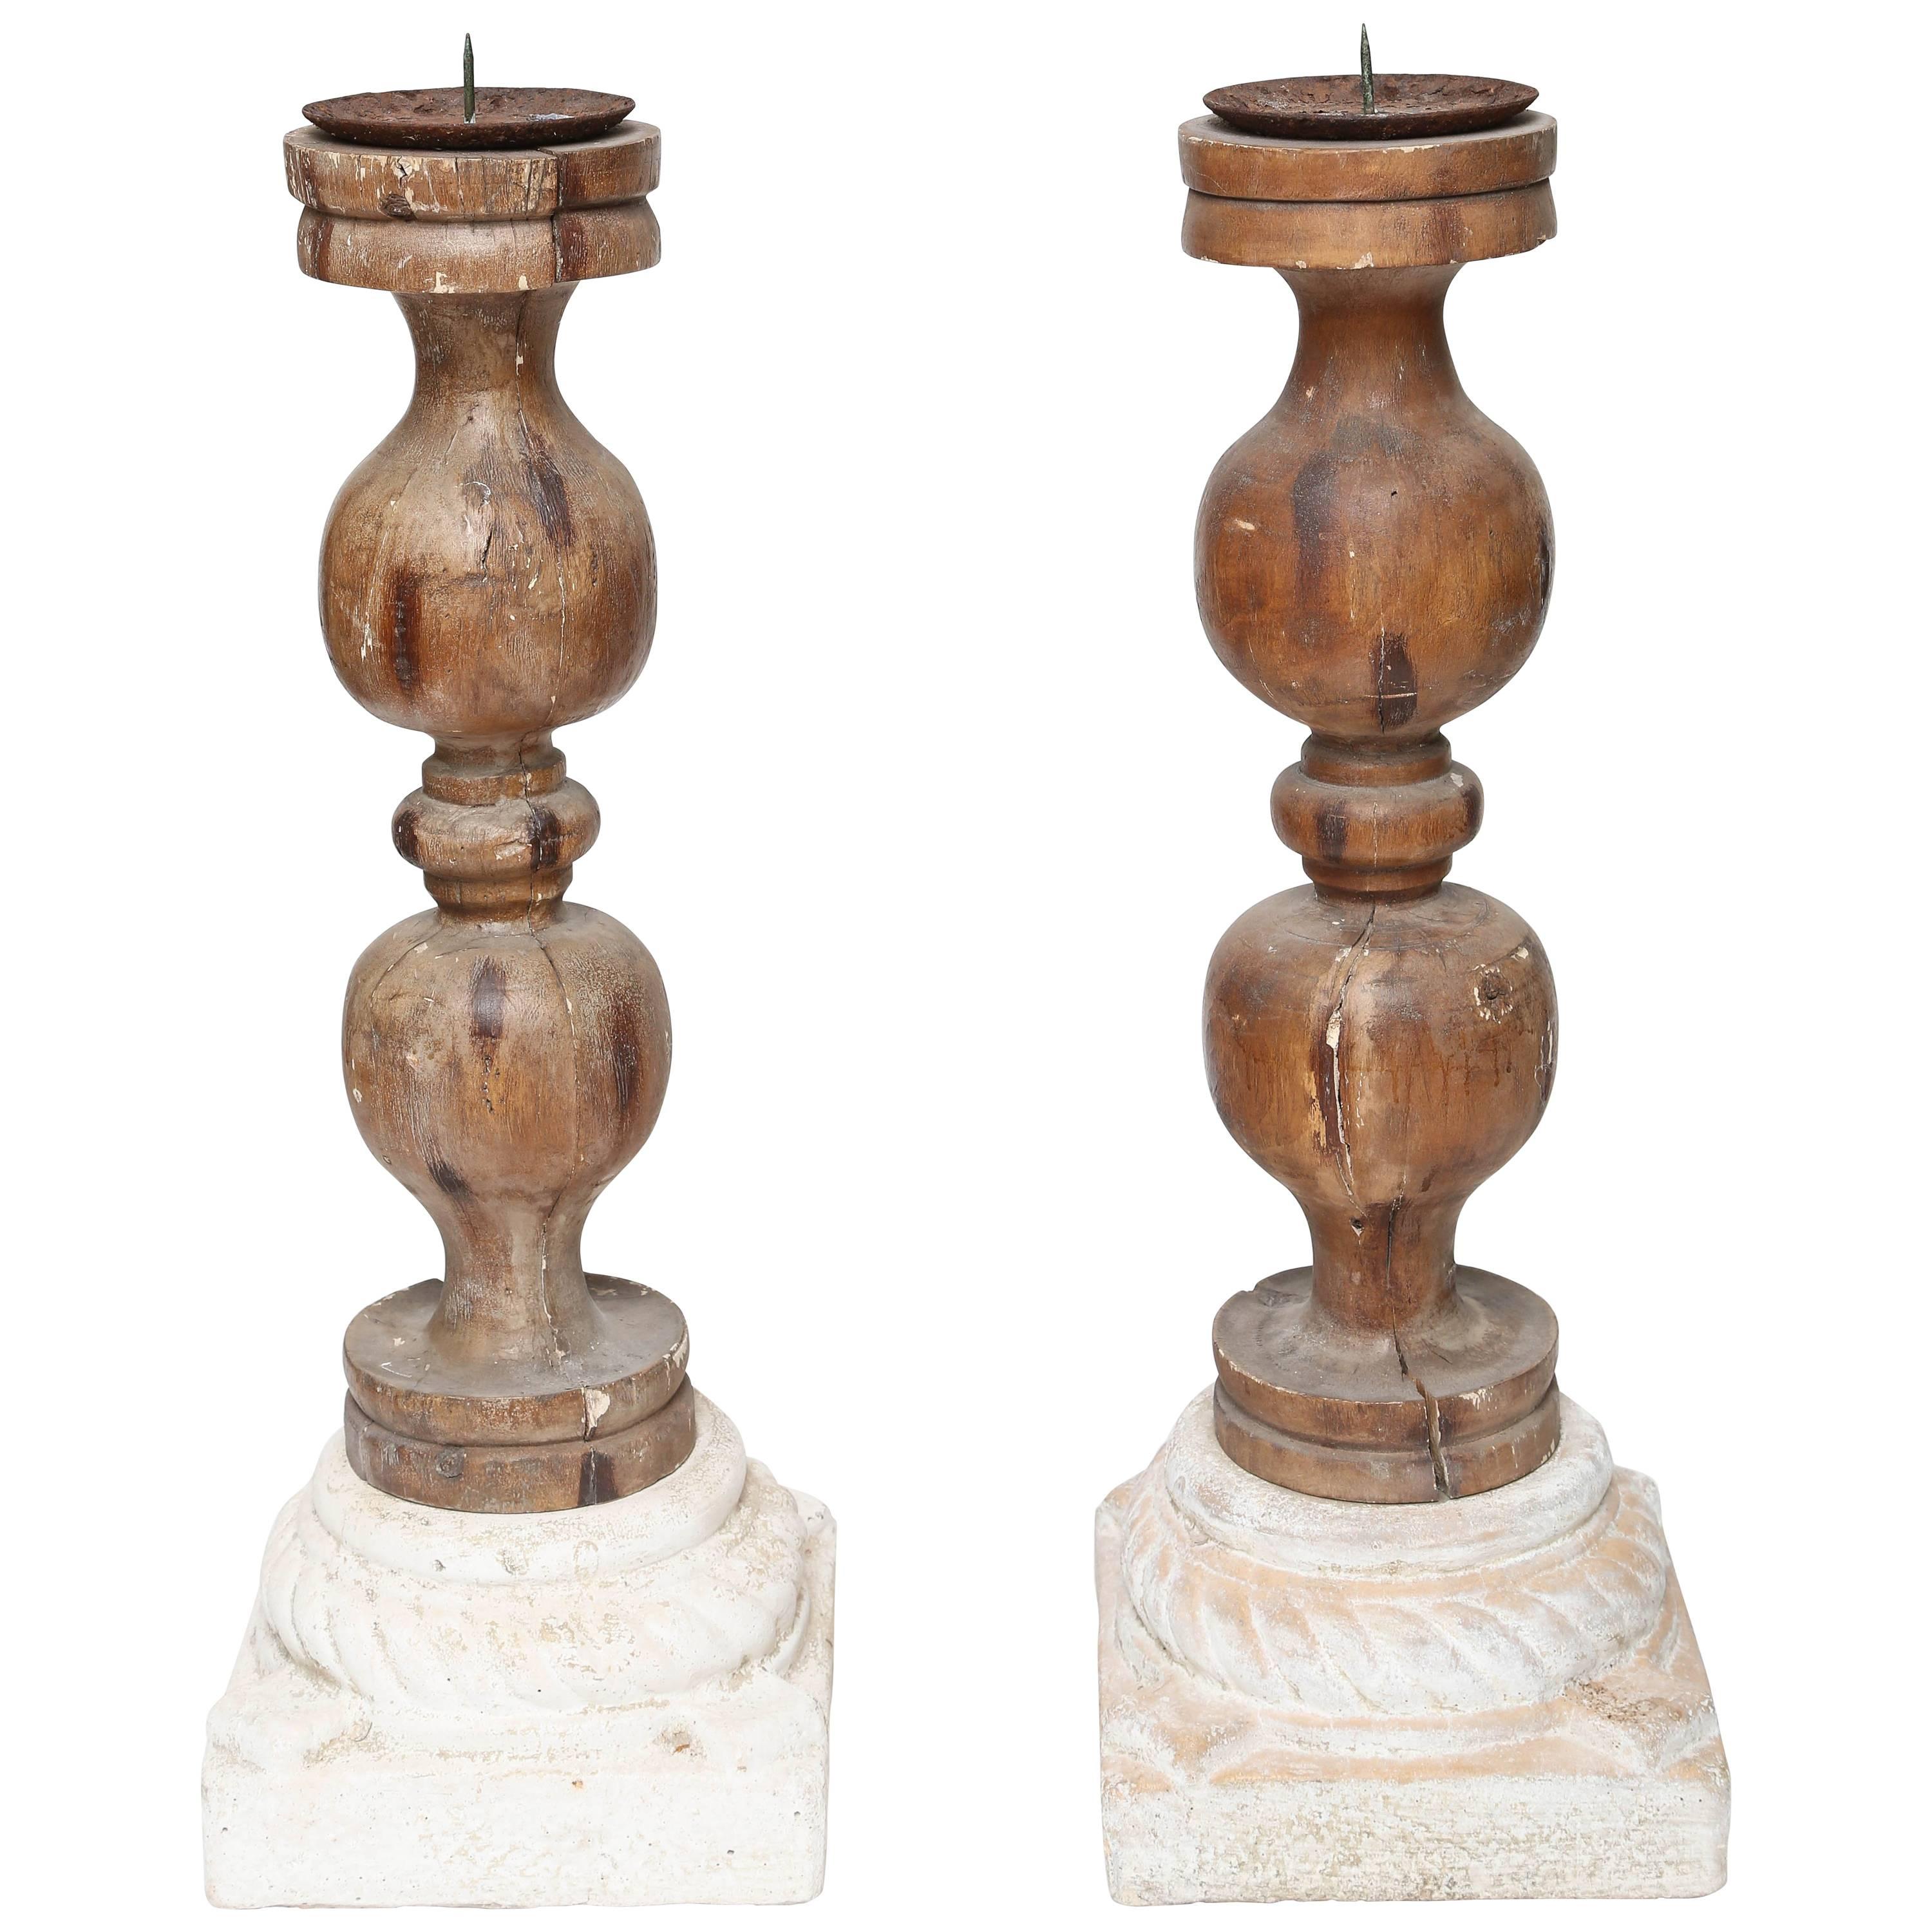 Pair of Architectural Wood and Stone Candlesticks For Sale